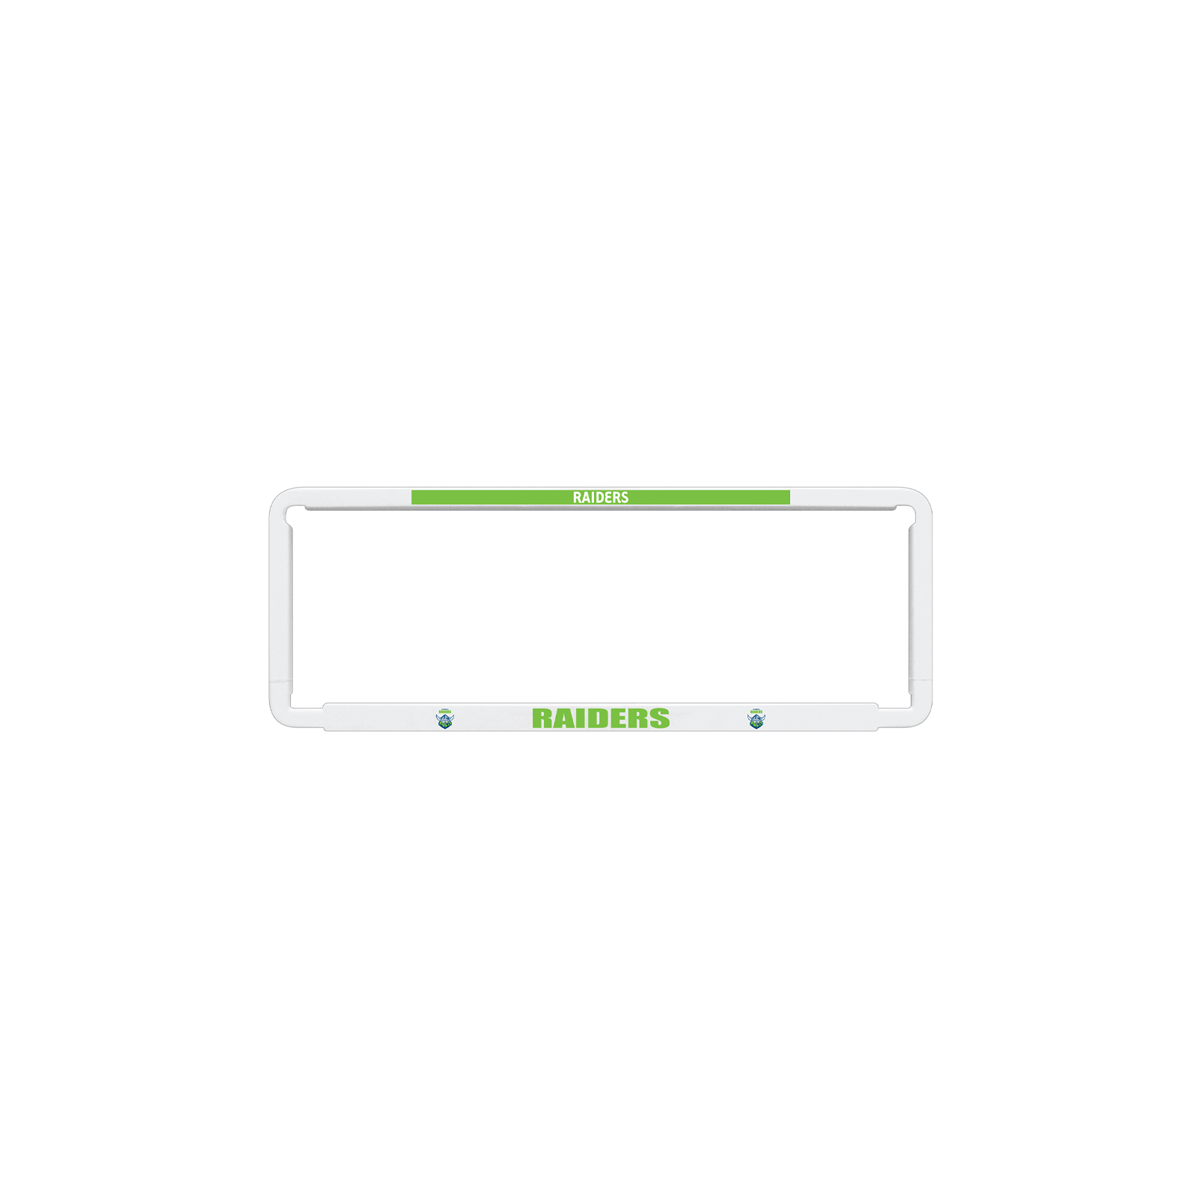 Canberra Raiders NRL Number Plate Cover